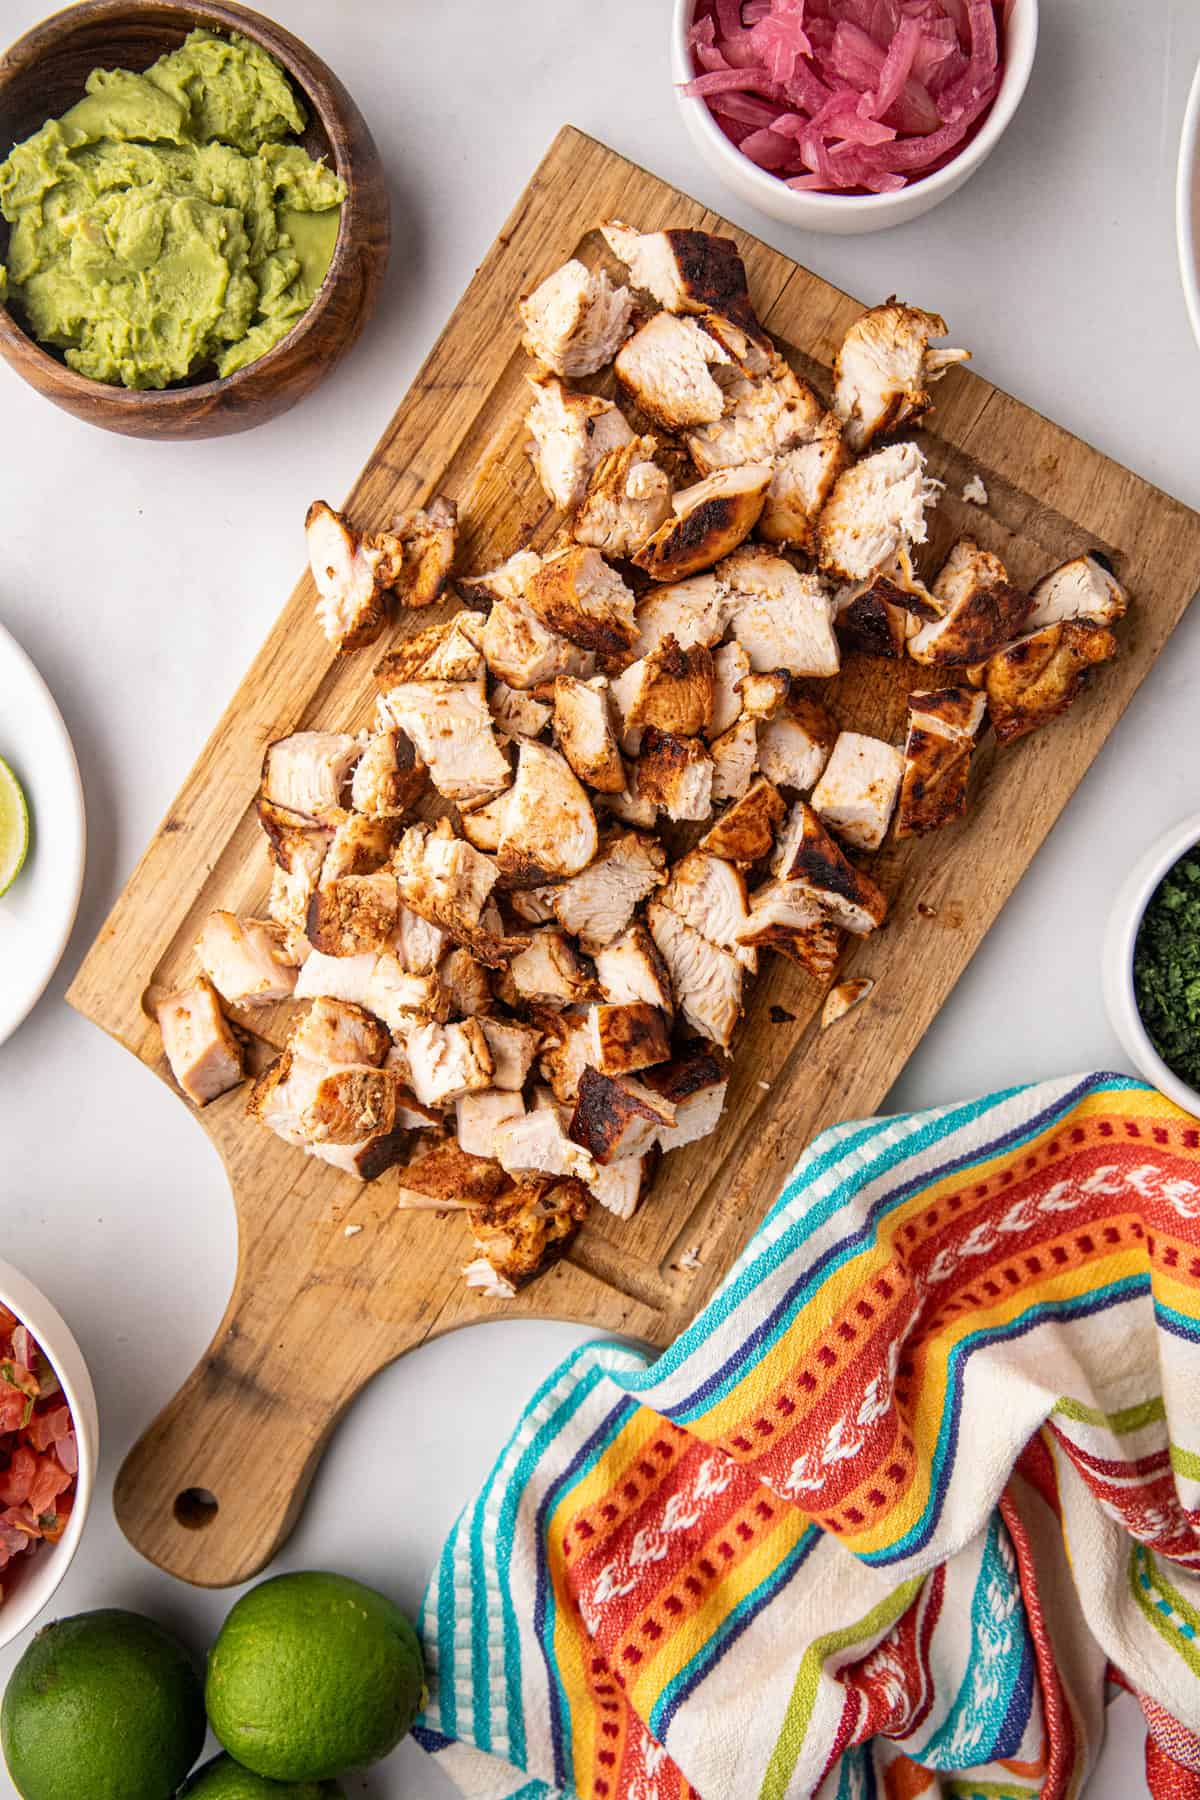 Cooked and diced chicken breasts on wooden cutting board for Chicken Street Tacos